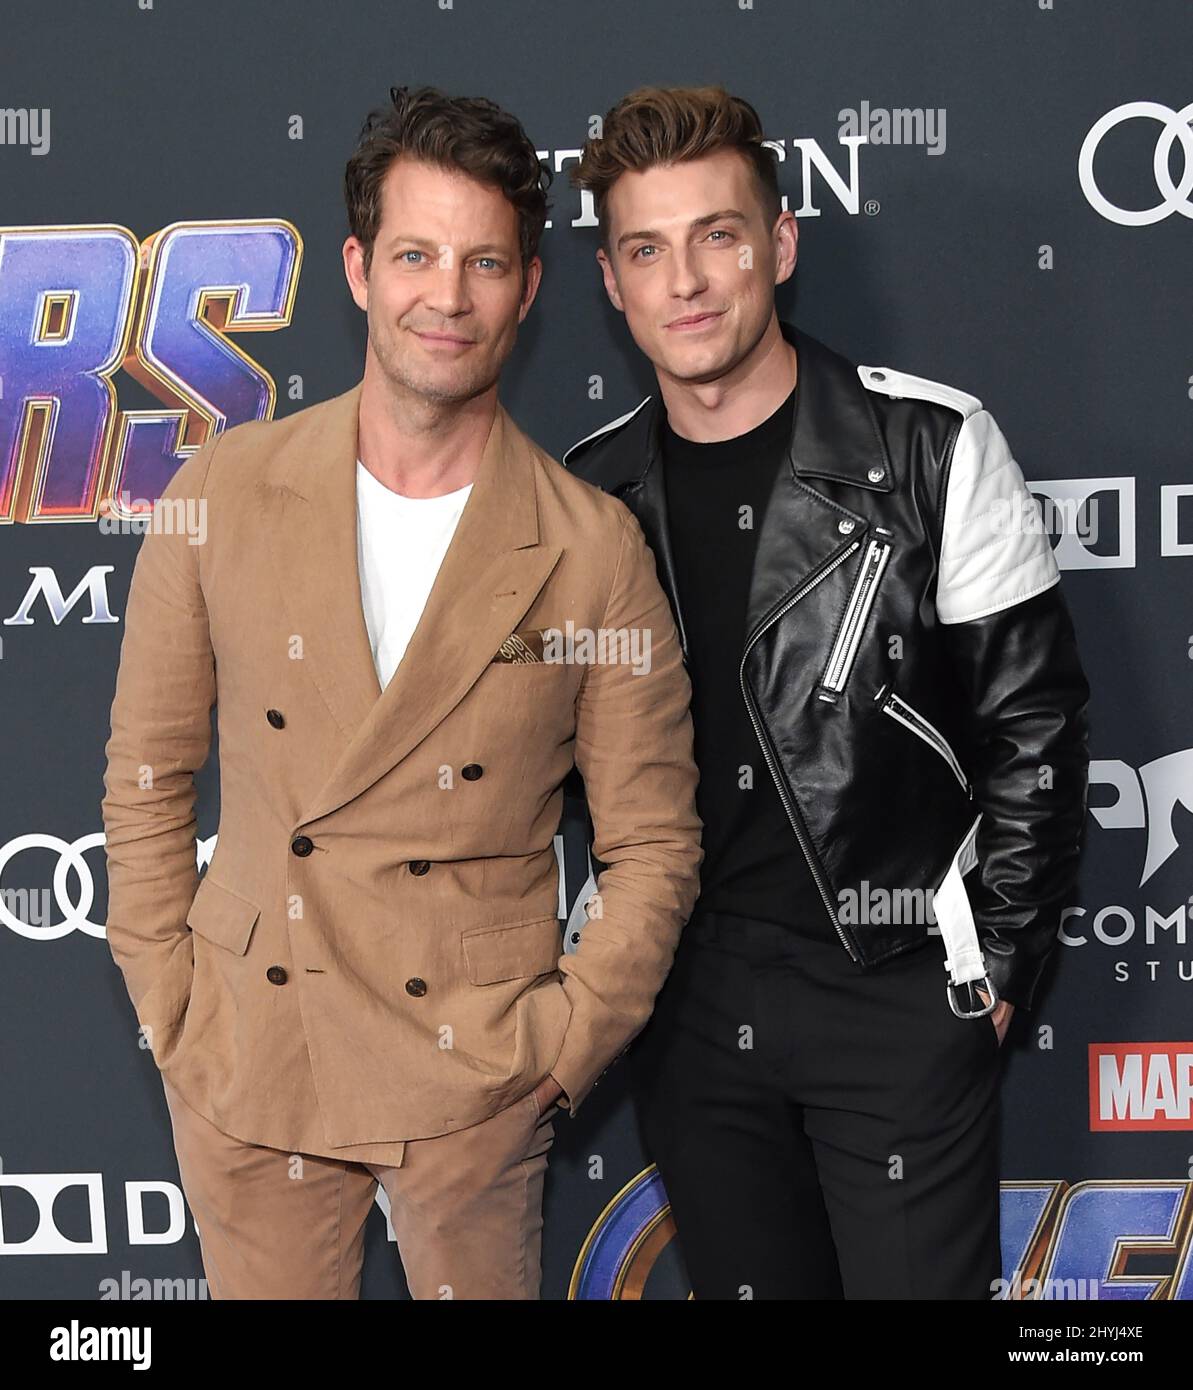 Nate Berkus and Jeremiah Brent attending the world premiere of Avengers: Endgame held at the LA Convention Centre on April 22, 2019 in Los Angeles, California Stock Photo